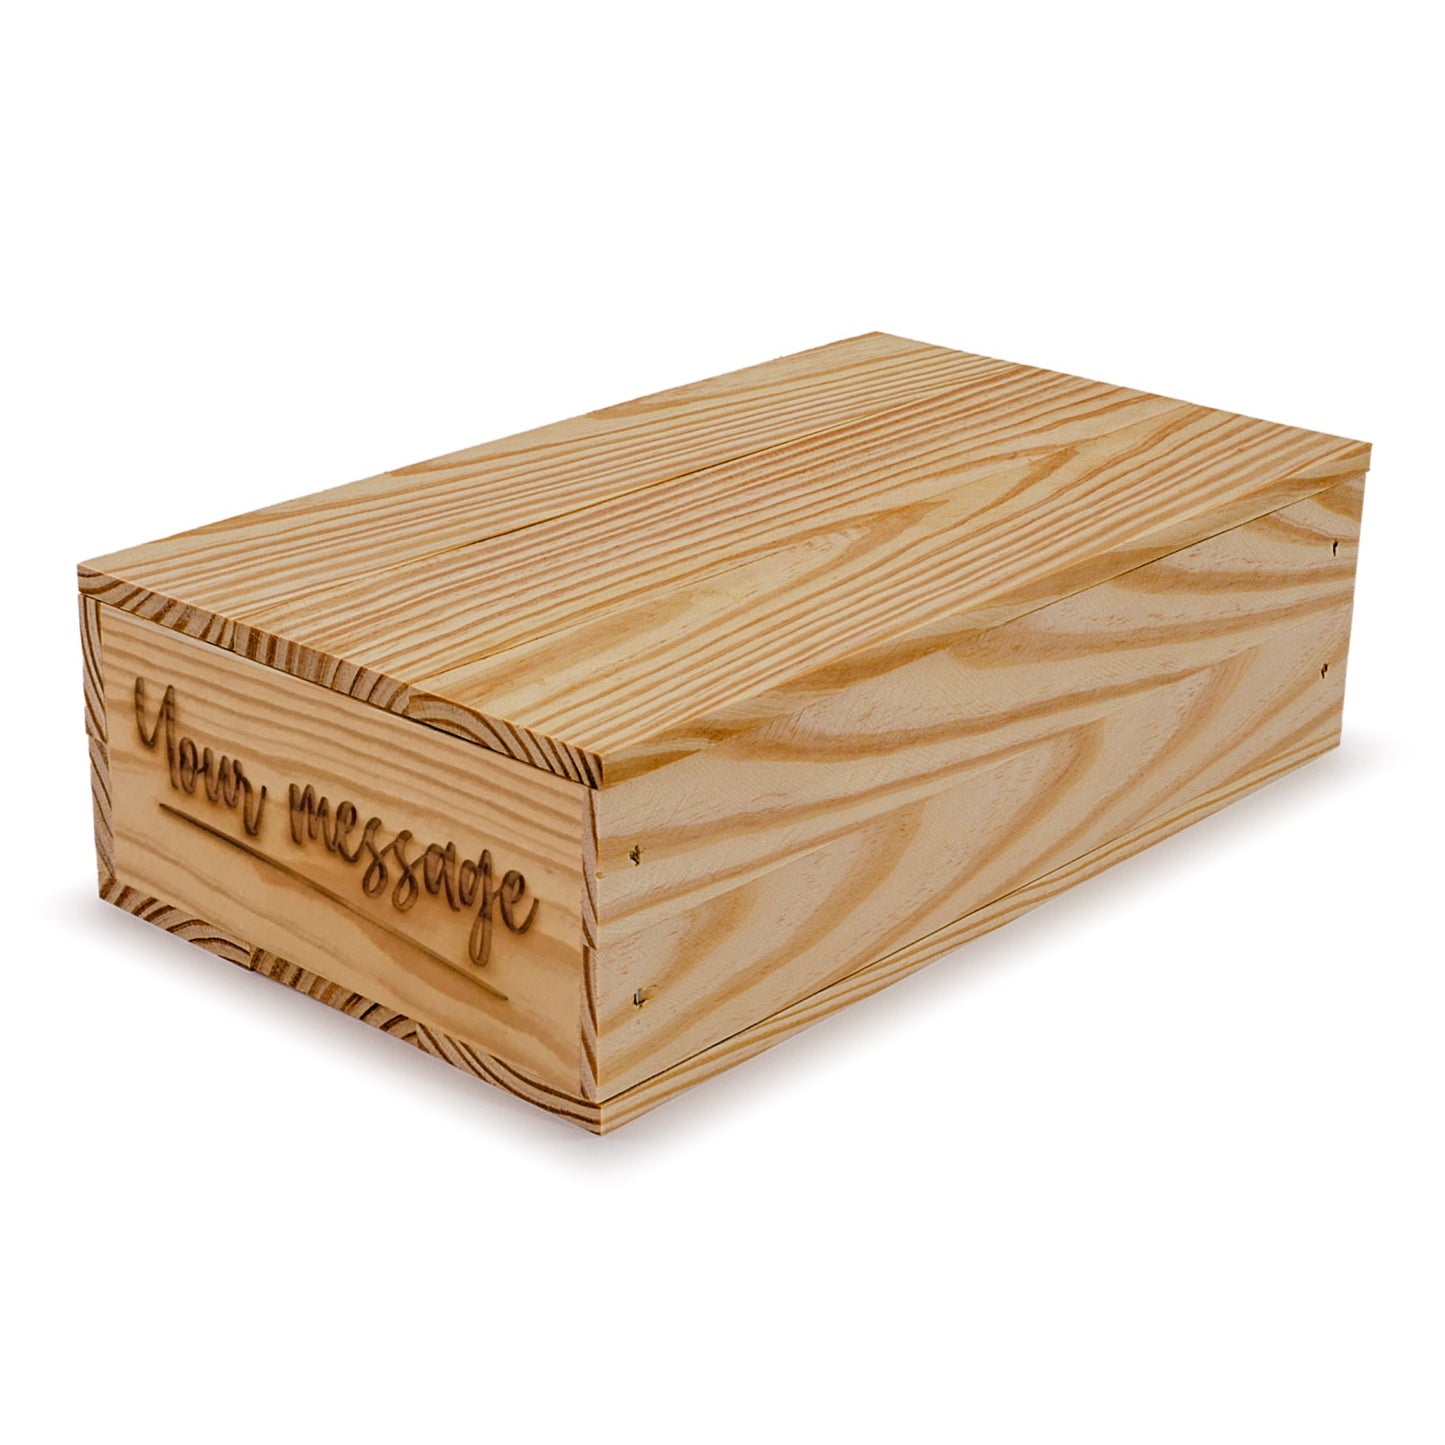 Small wooden crate with lid and custom message 13x7.5x3.5, 6-BX-13-7.5-3.5-ST-NW-LL, 12-BX-13-7.5-3.5-ST-NW-LL, 24-BX-13-7.5-3.5-ST-NW-LL, 48-BX-13-7.5-3.5-ST-NW-LL, 96-BX-13-7.5-3.5-ST-NW-LL